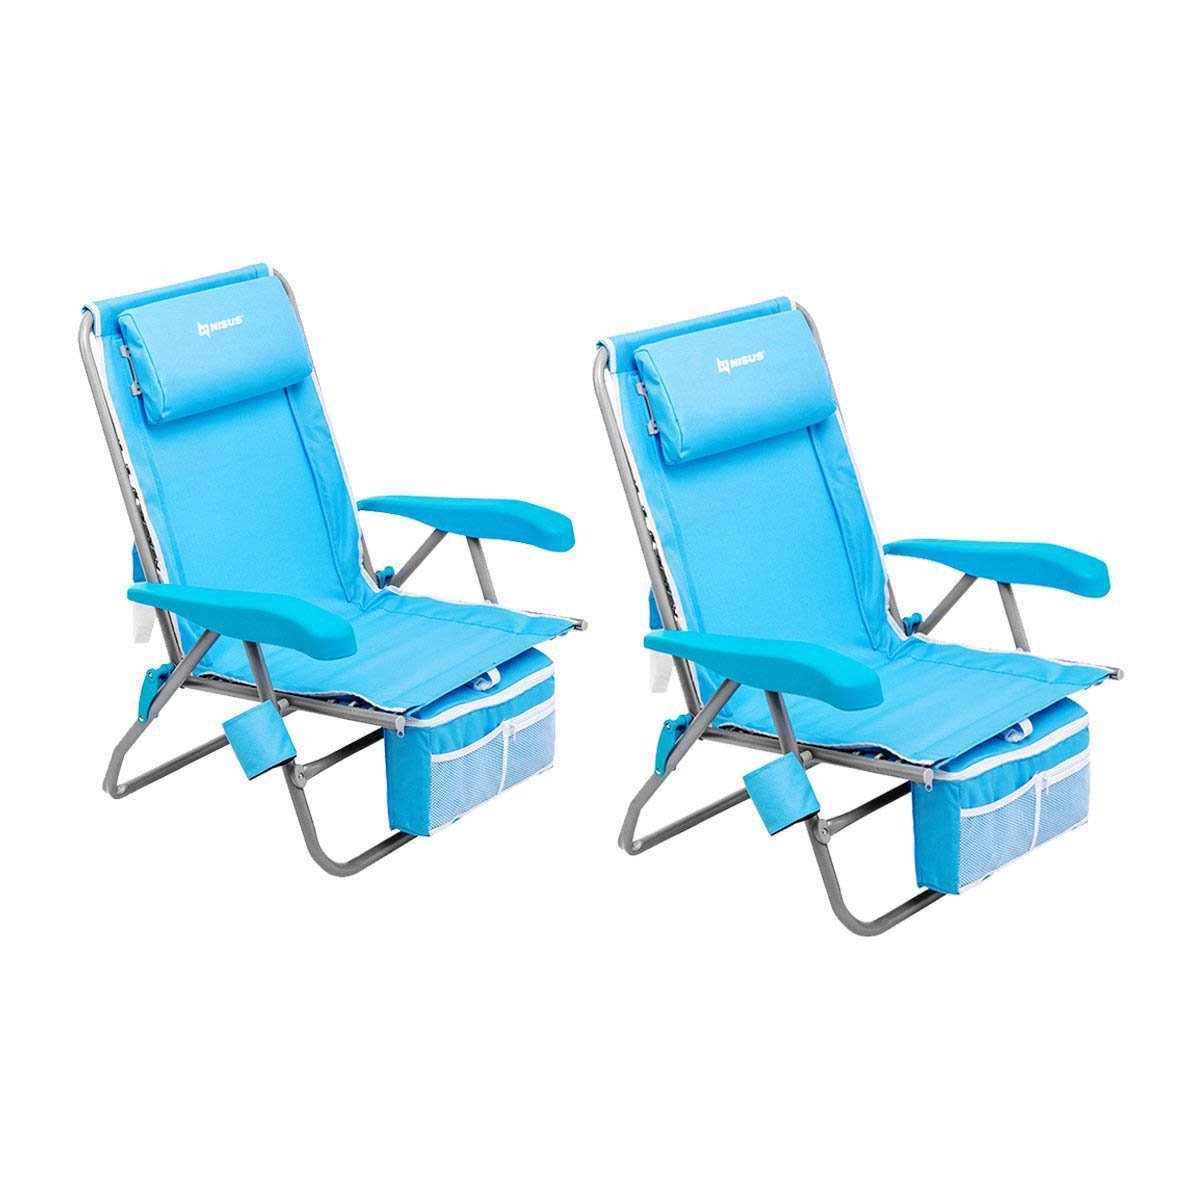 Premium Backpack Beach Chair with Cooler Bag and Headrest, Blue, Set of 2